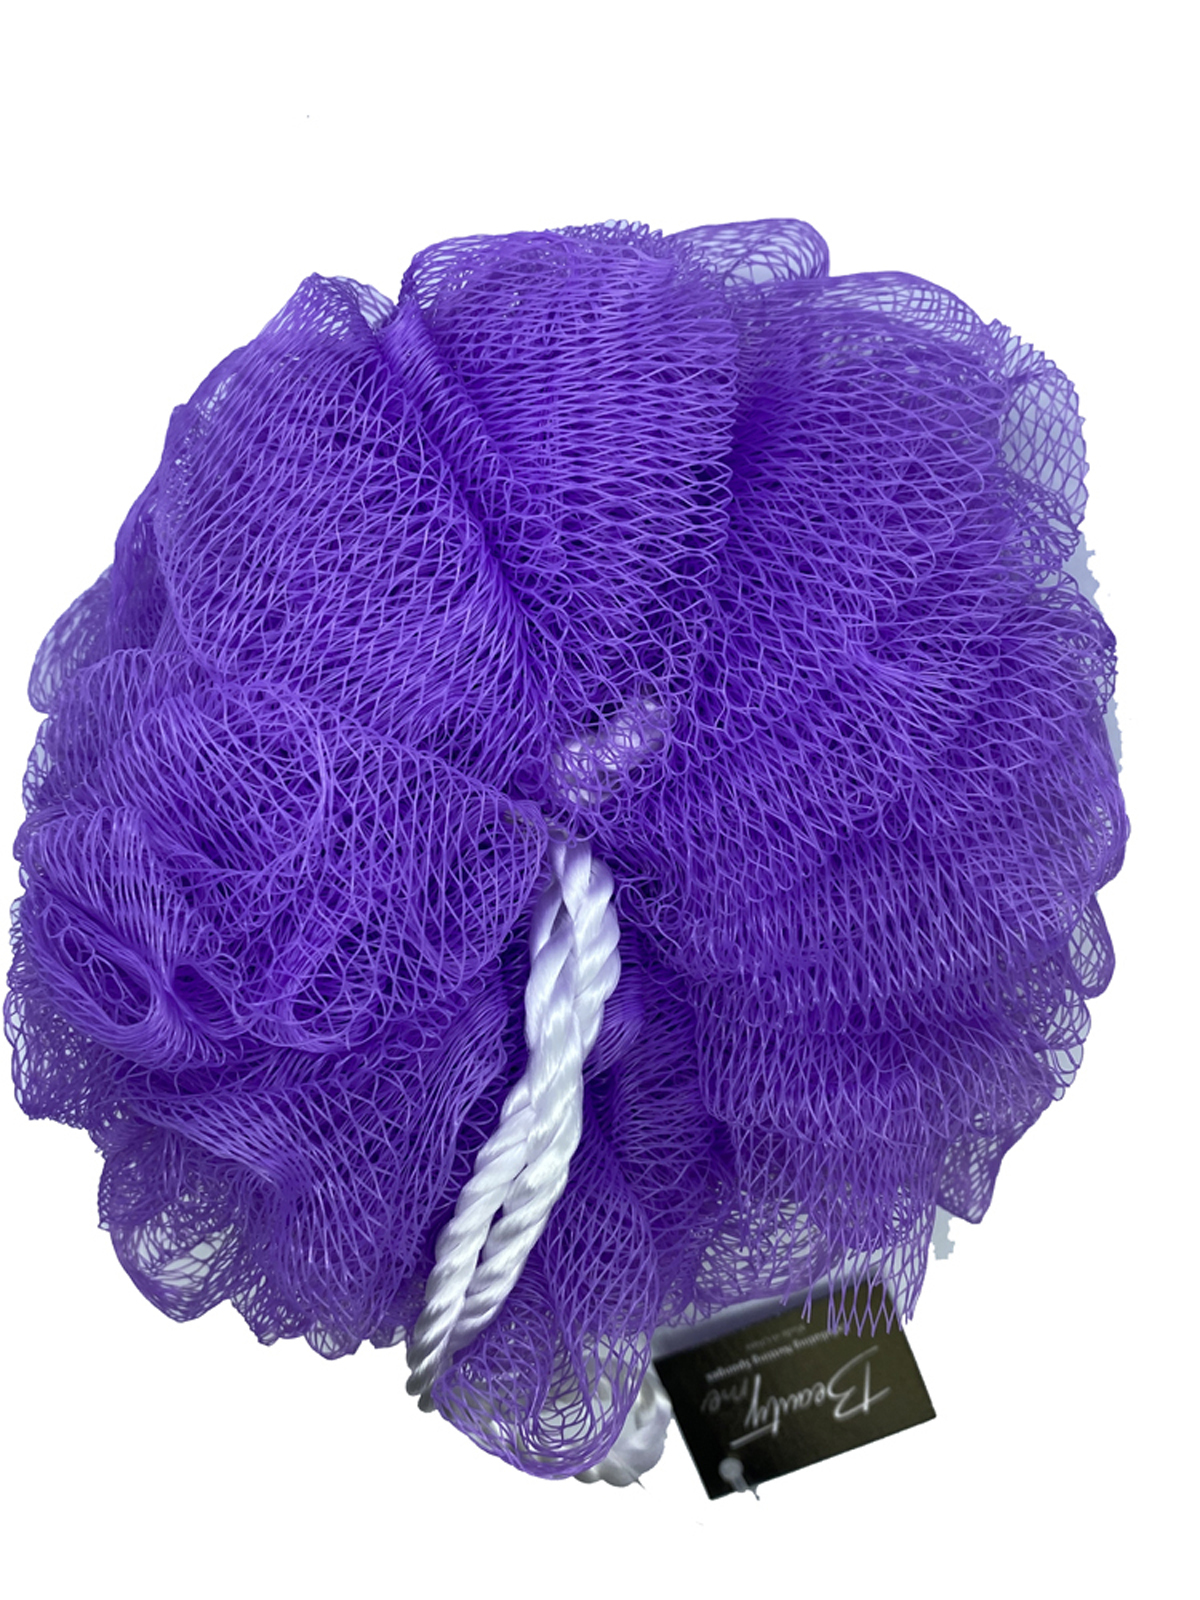 Large Exfoliating Bath And Shower Mesh Net Sponge Ball Scrubber Simply For Me